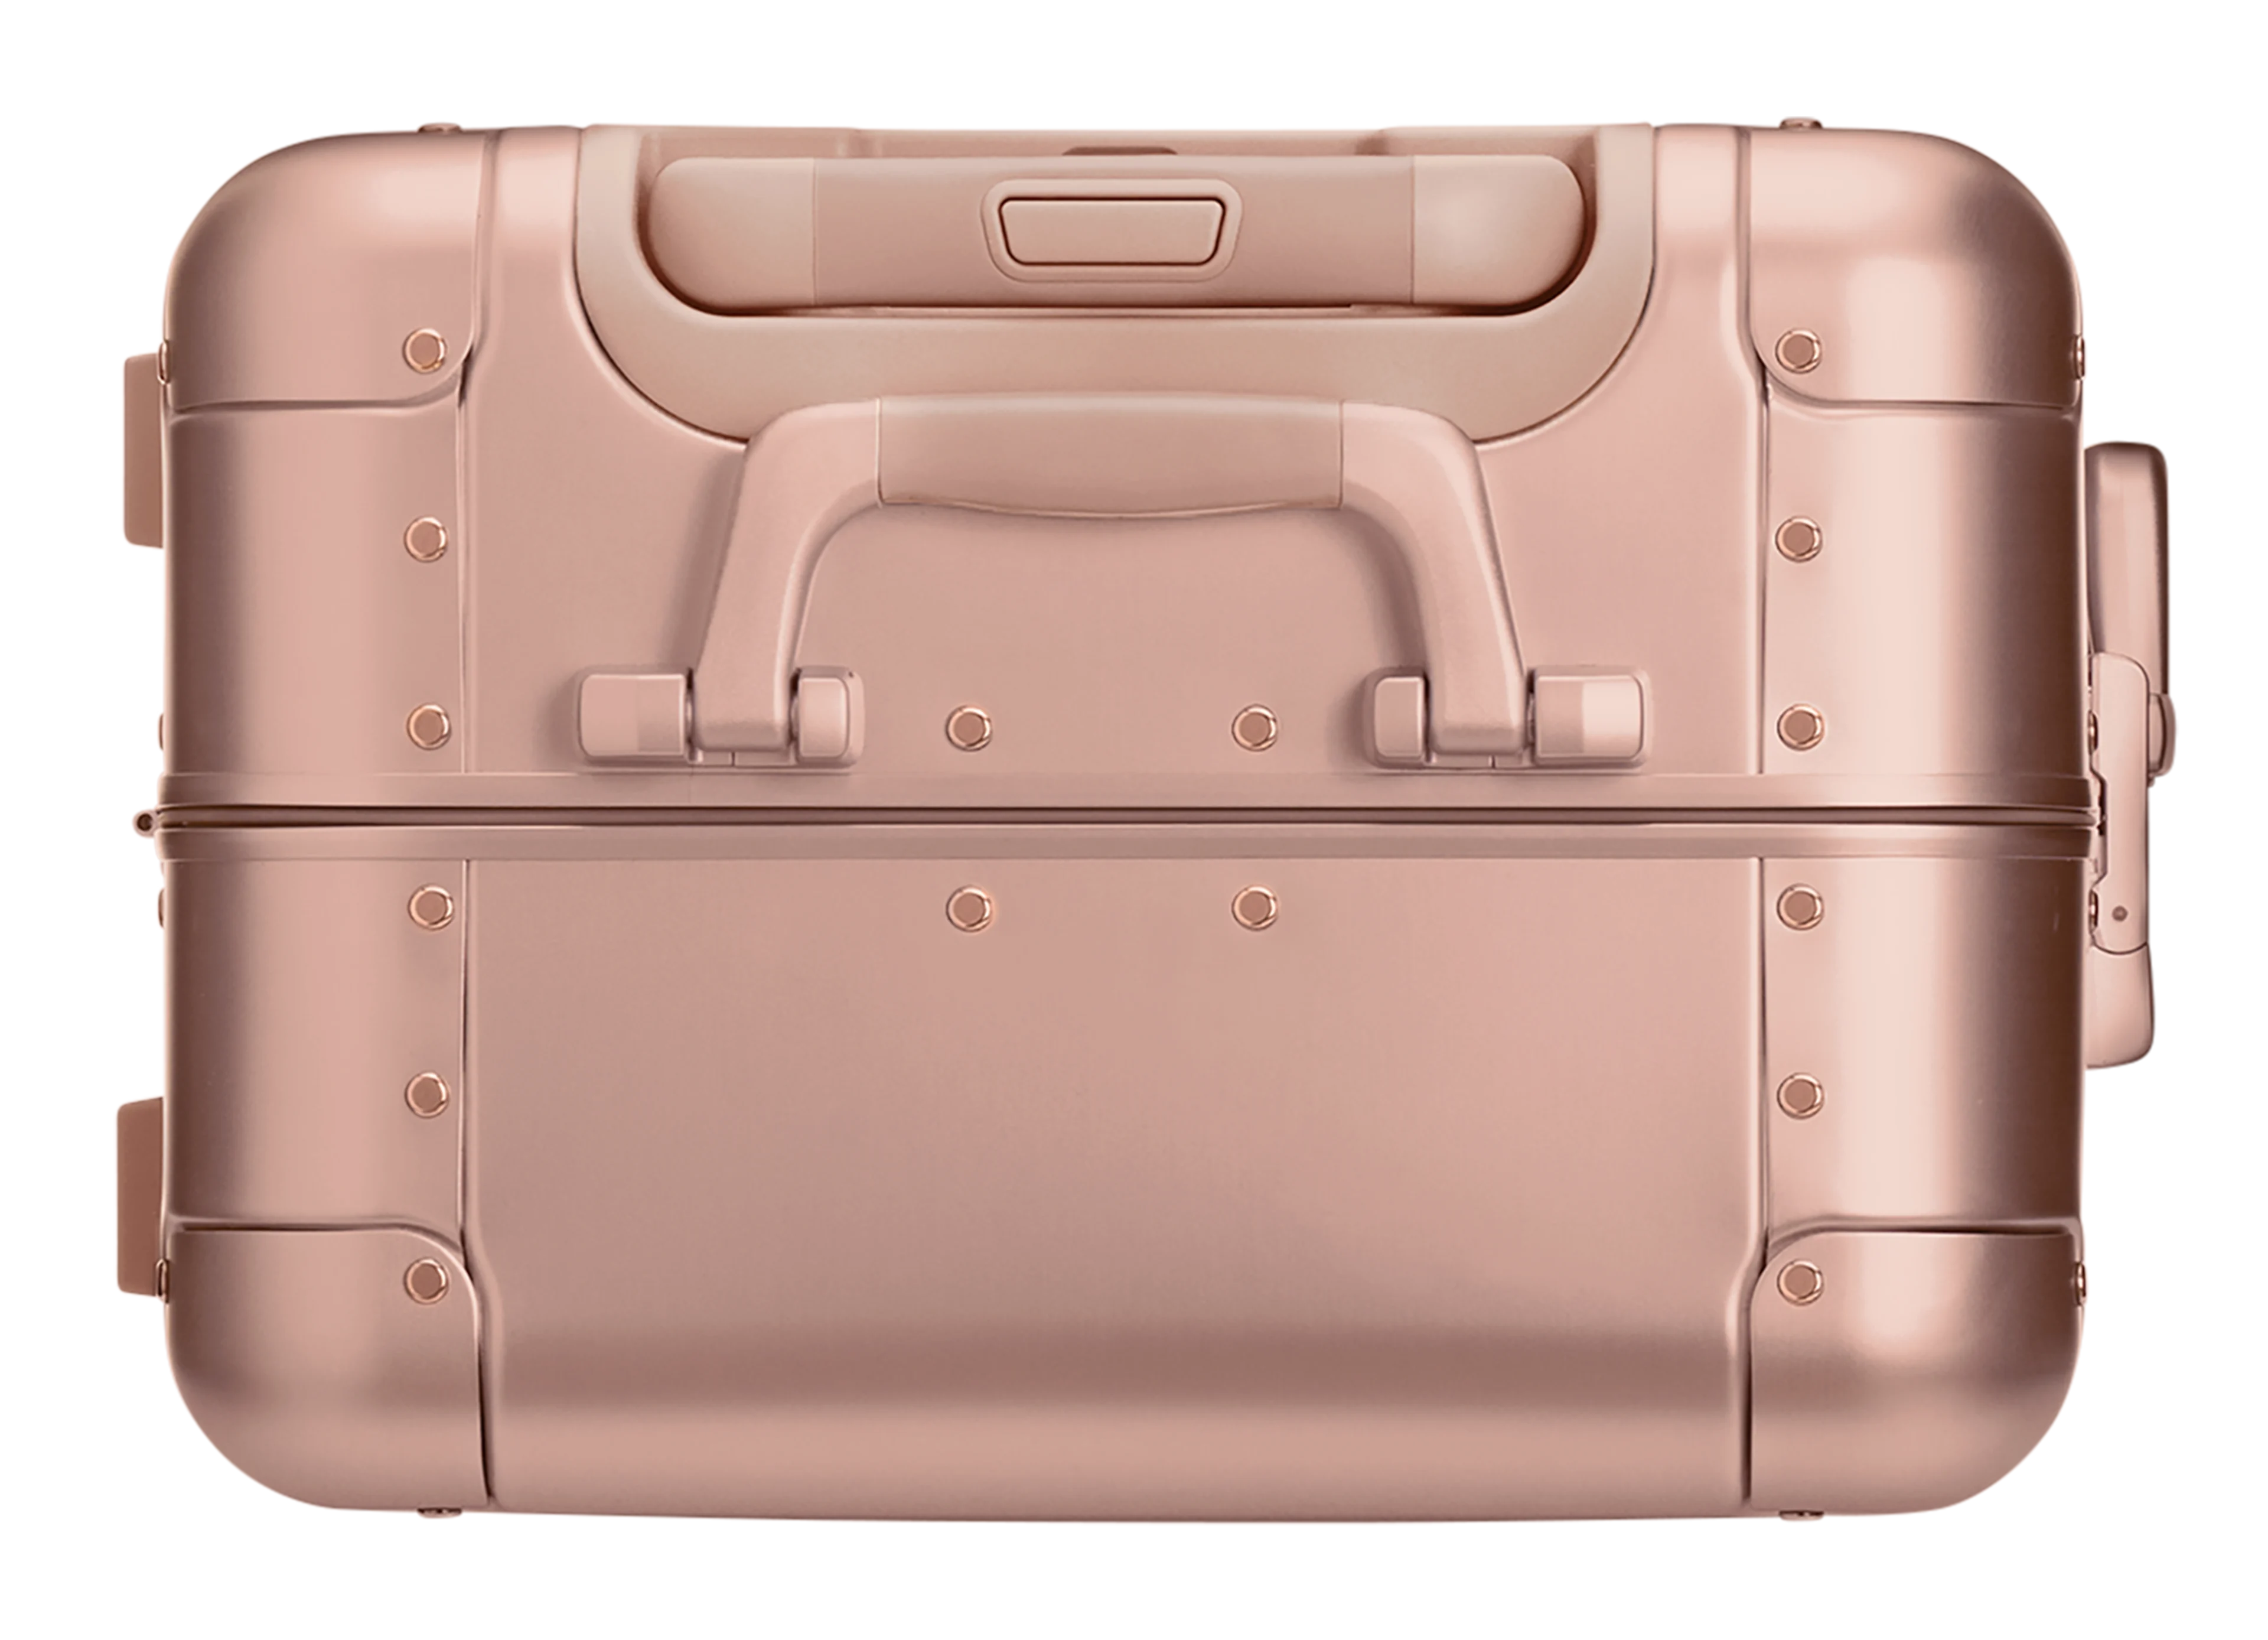 The Aluminum Bigger Carry On in Rose Gold